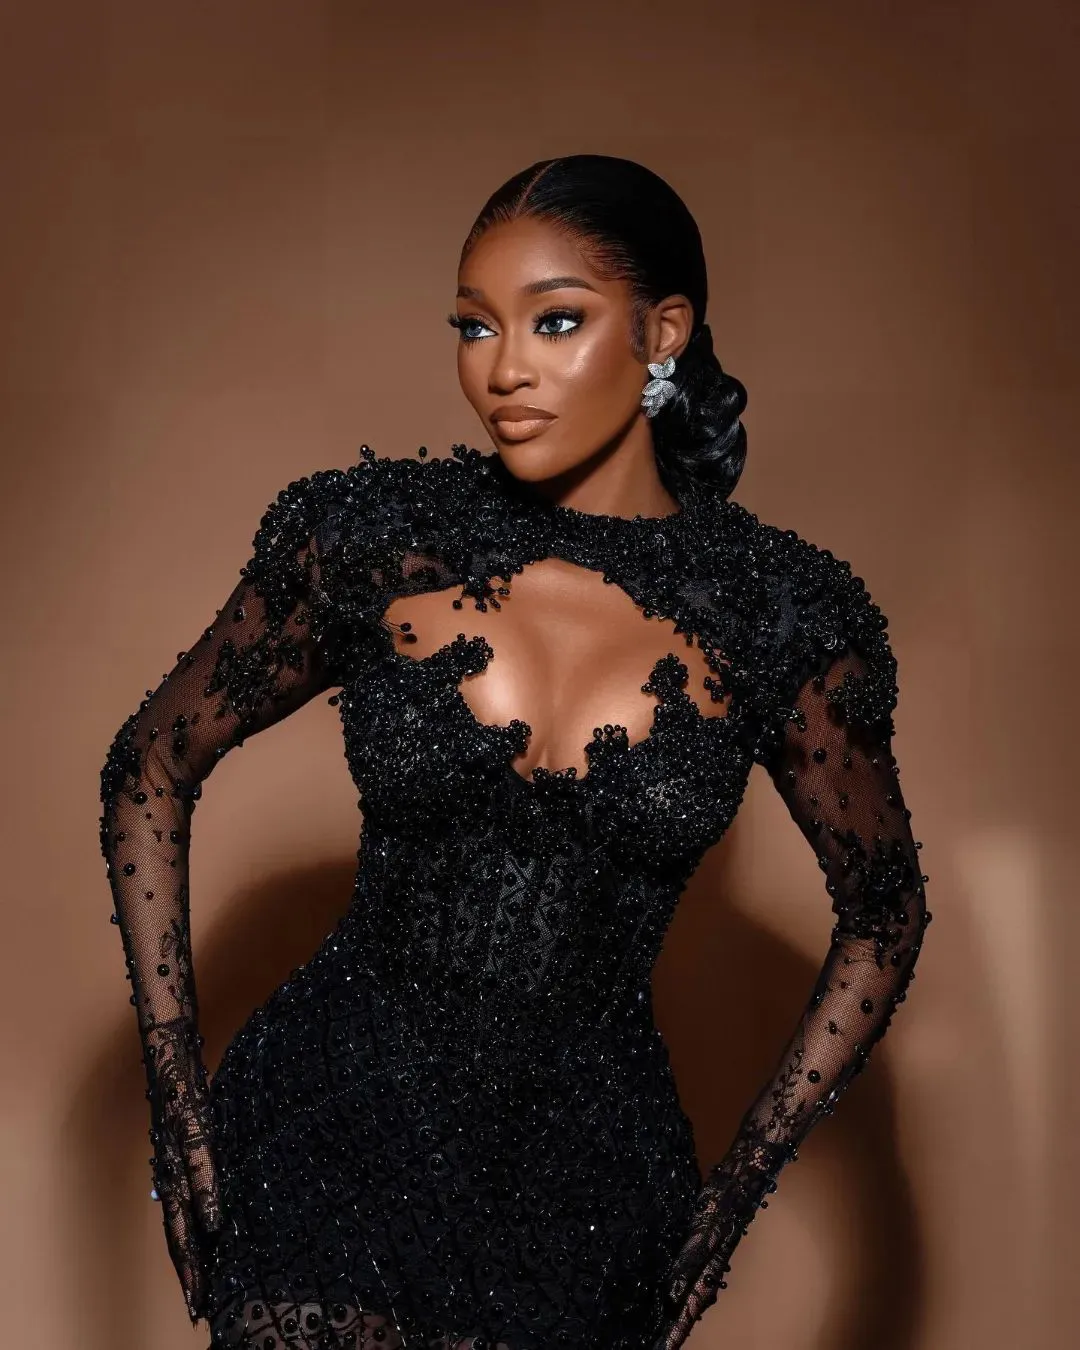 Luxury Black Girls Mermaid Prom Dresses Feathers Pearls Party Dresses Illusion Long Sleeves Custom Made Evening Dress